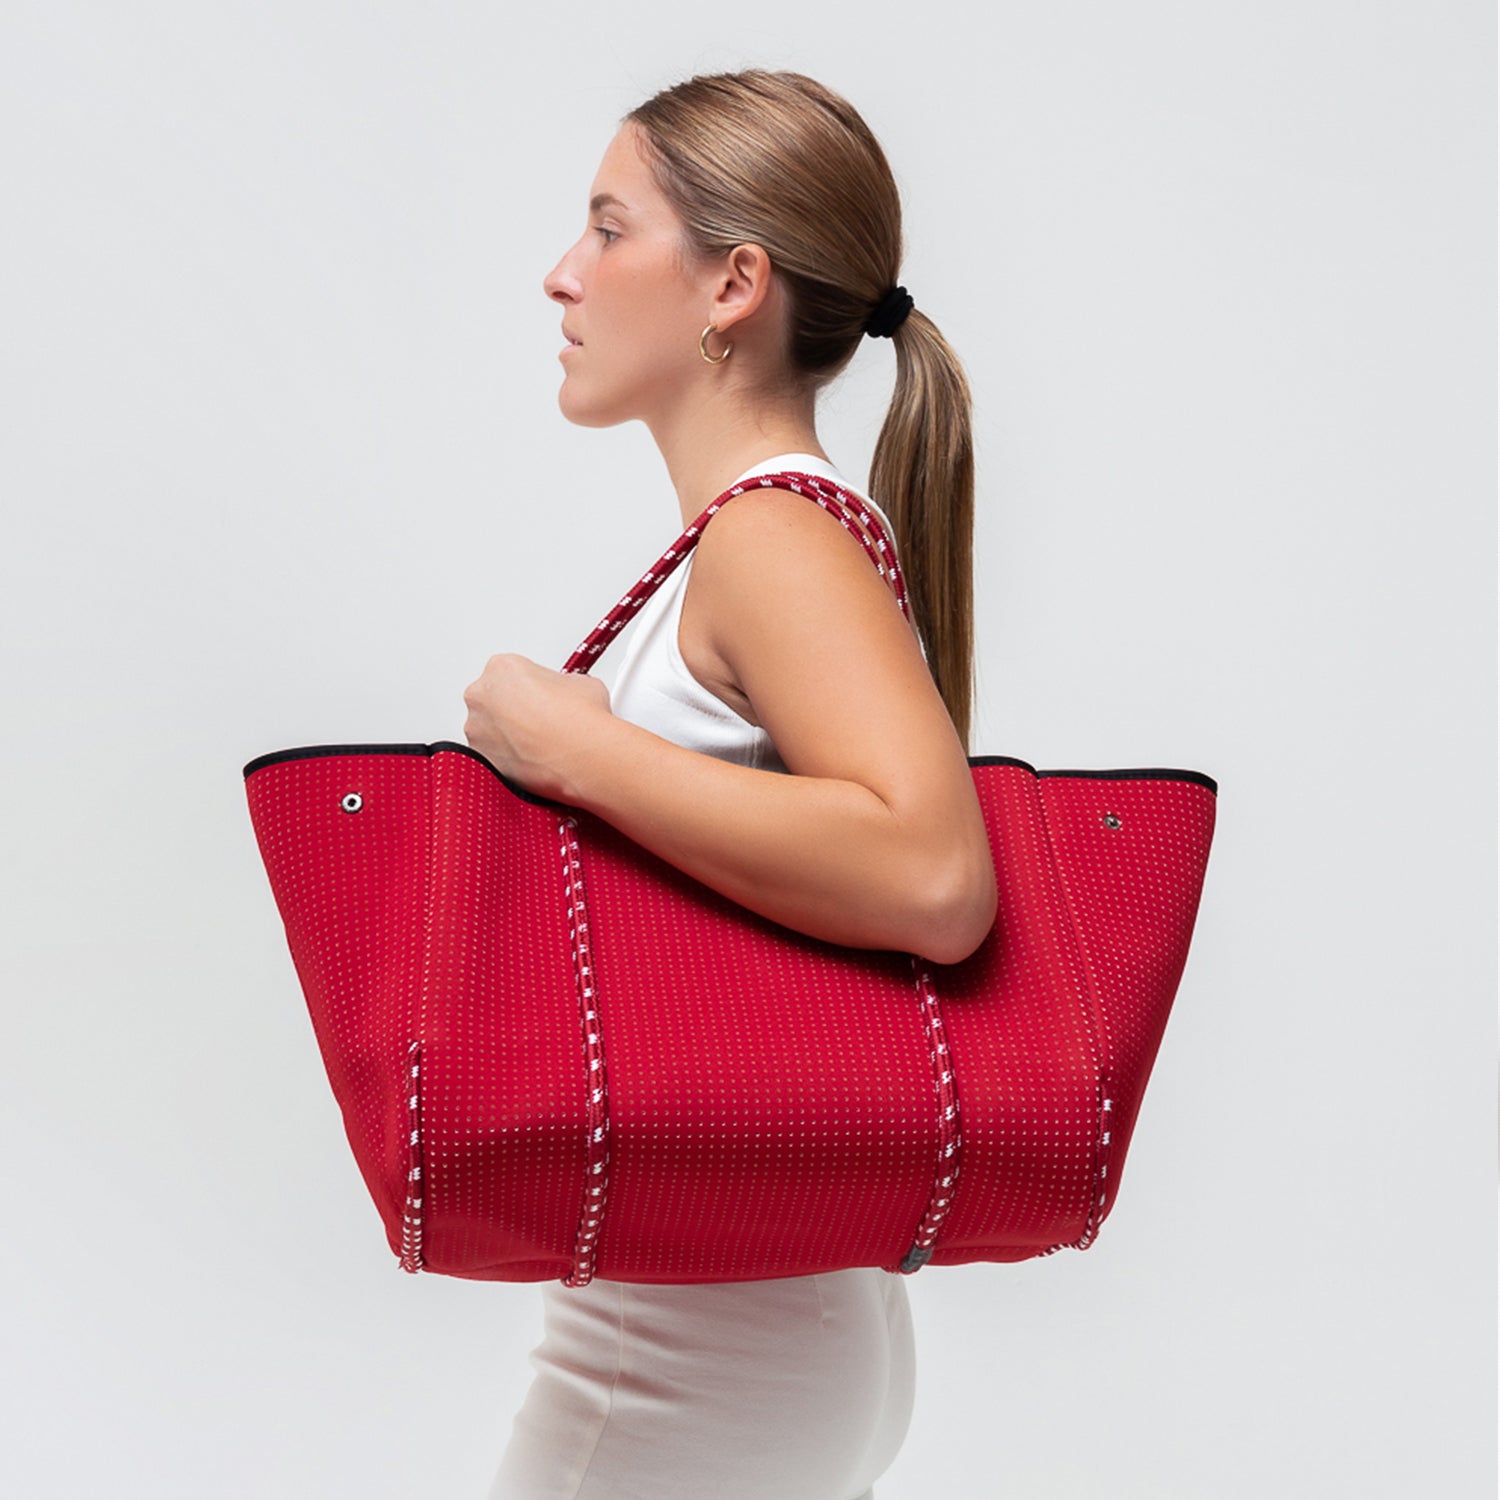 Pouch + Everyday Tote - Burgundy by Pop Ups